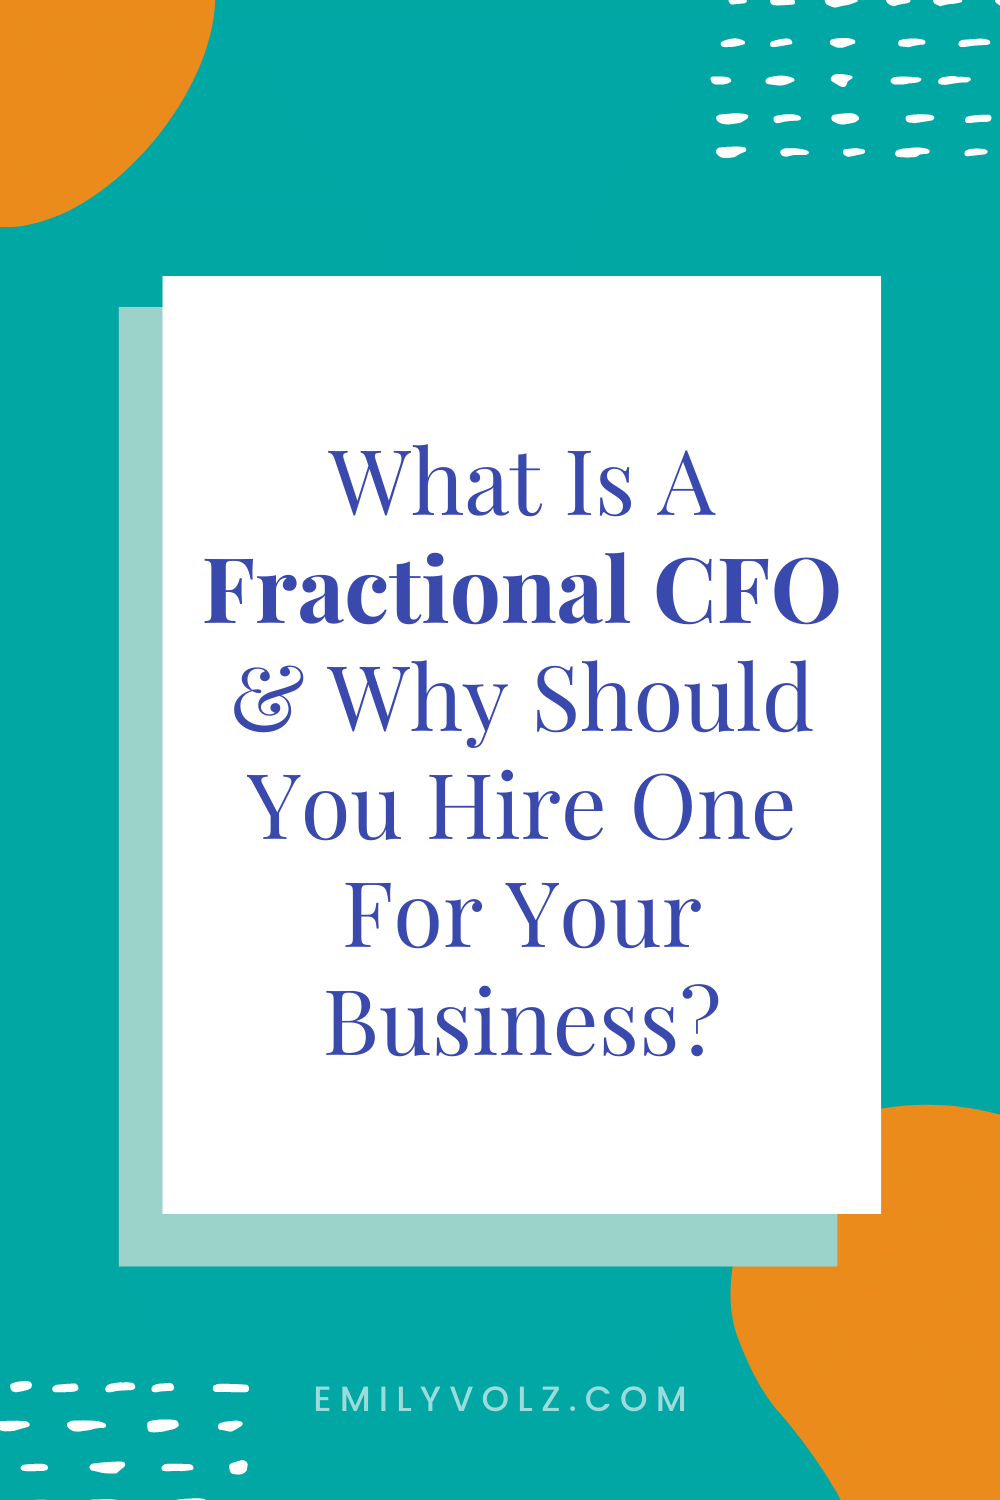 What Is A Fractional CFO, and Why Should You Hire One For Your Business? | Emily Volz Bookkeeper & CFO